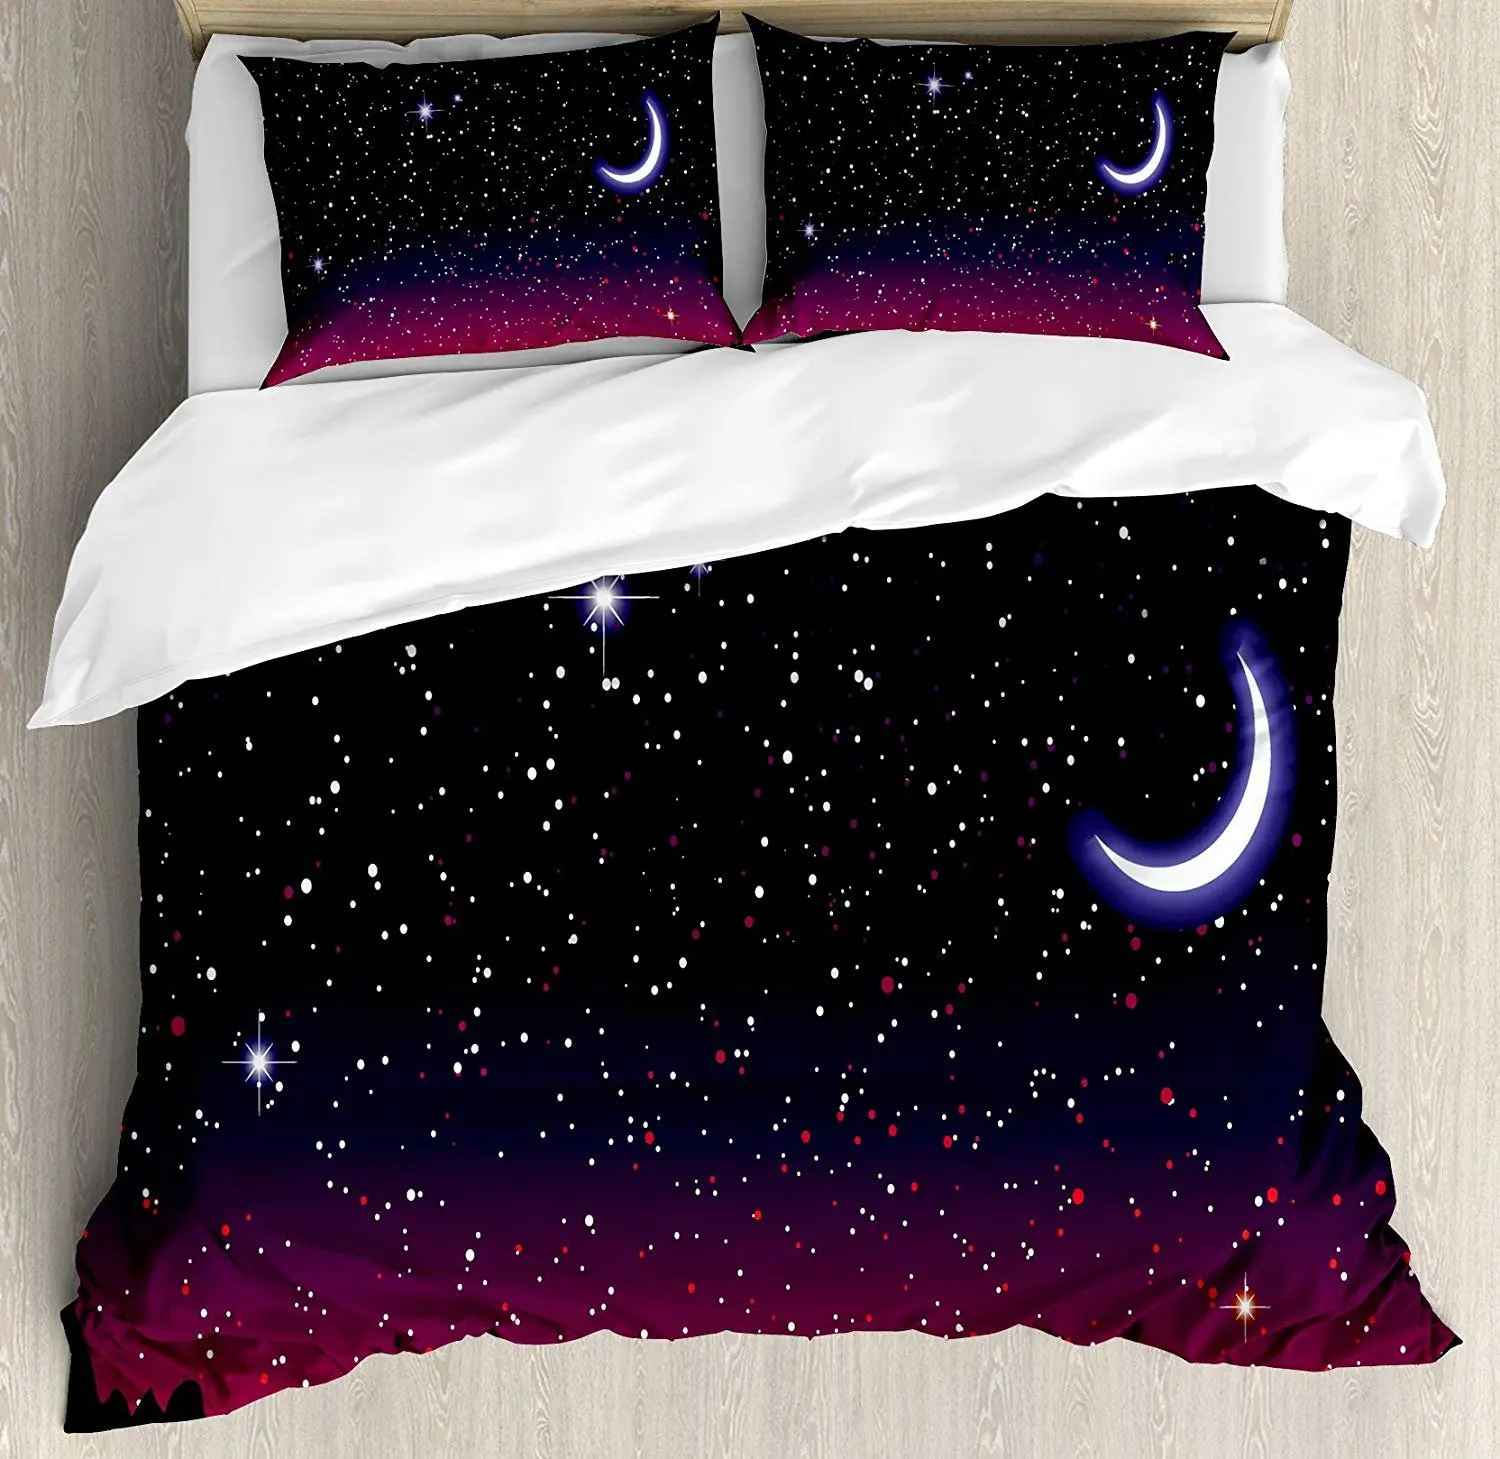 

Night Bedding Set Red Sky at Night with Starry Landscape and Mountains Astrology Astronomy Duvet Cover Pillowcase Bed Set